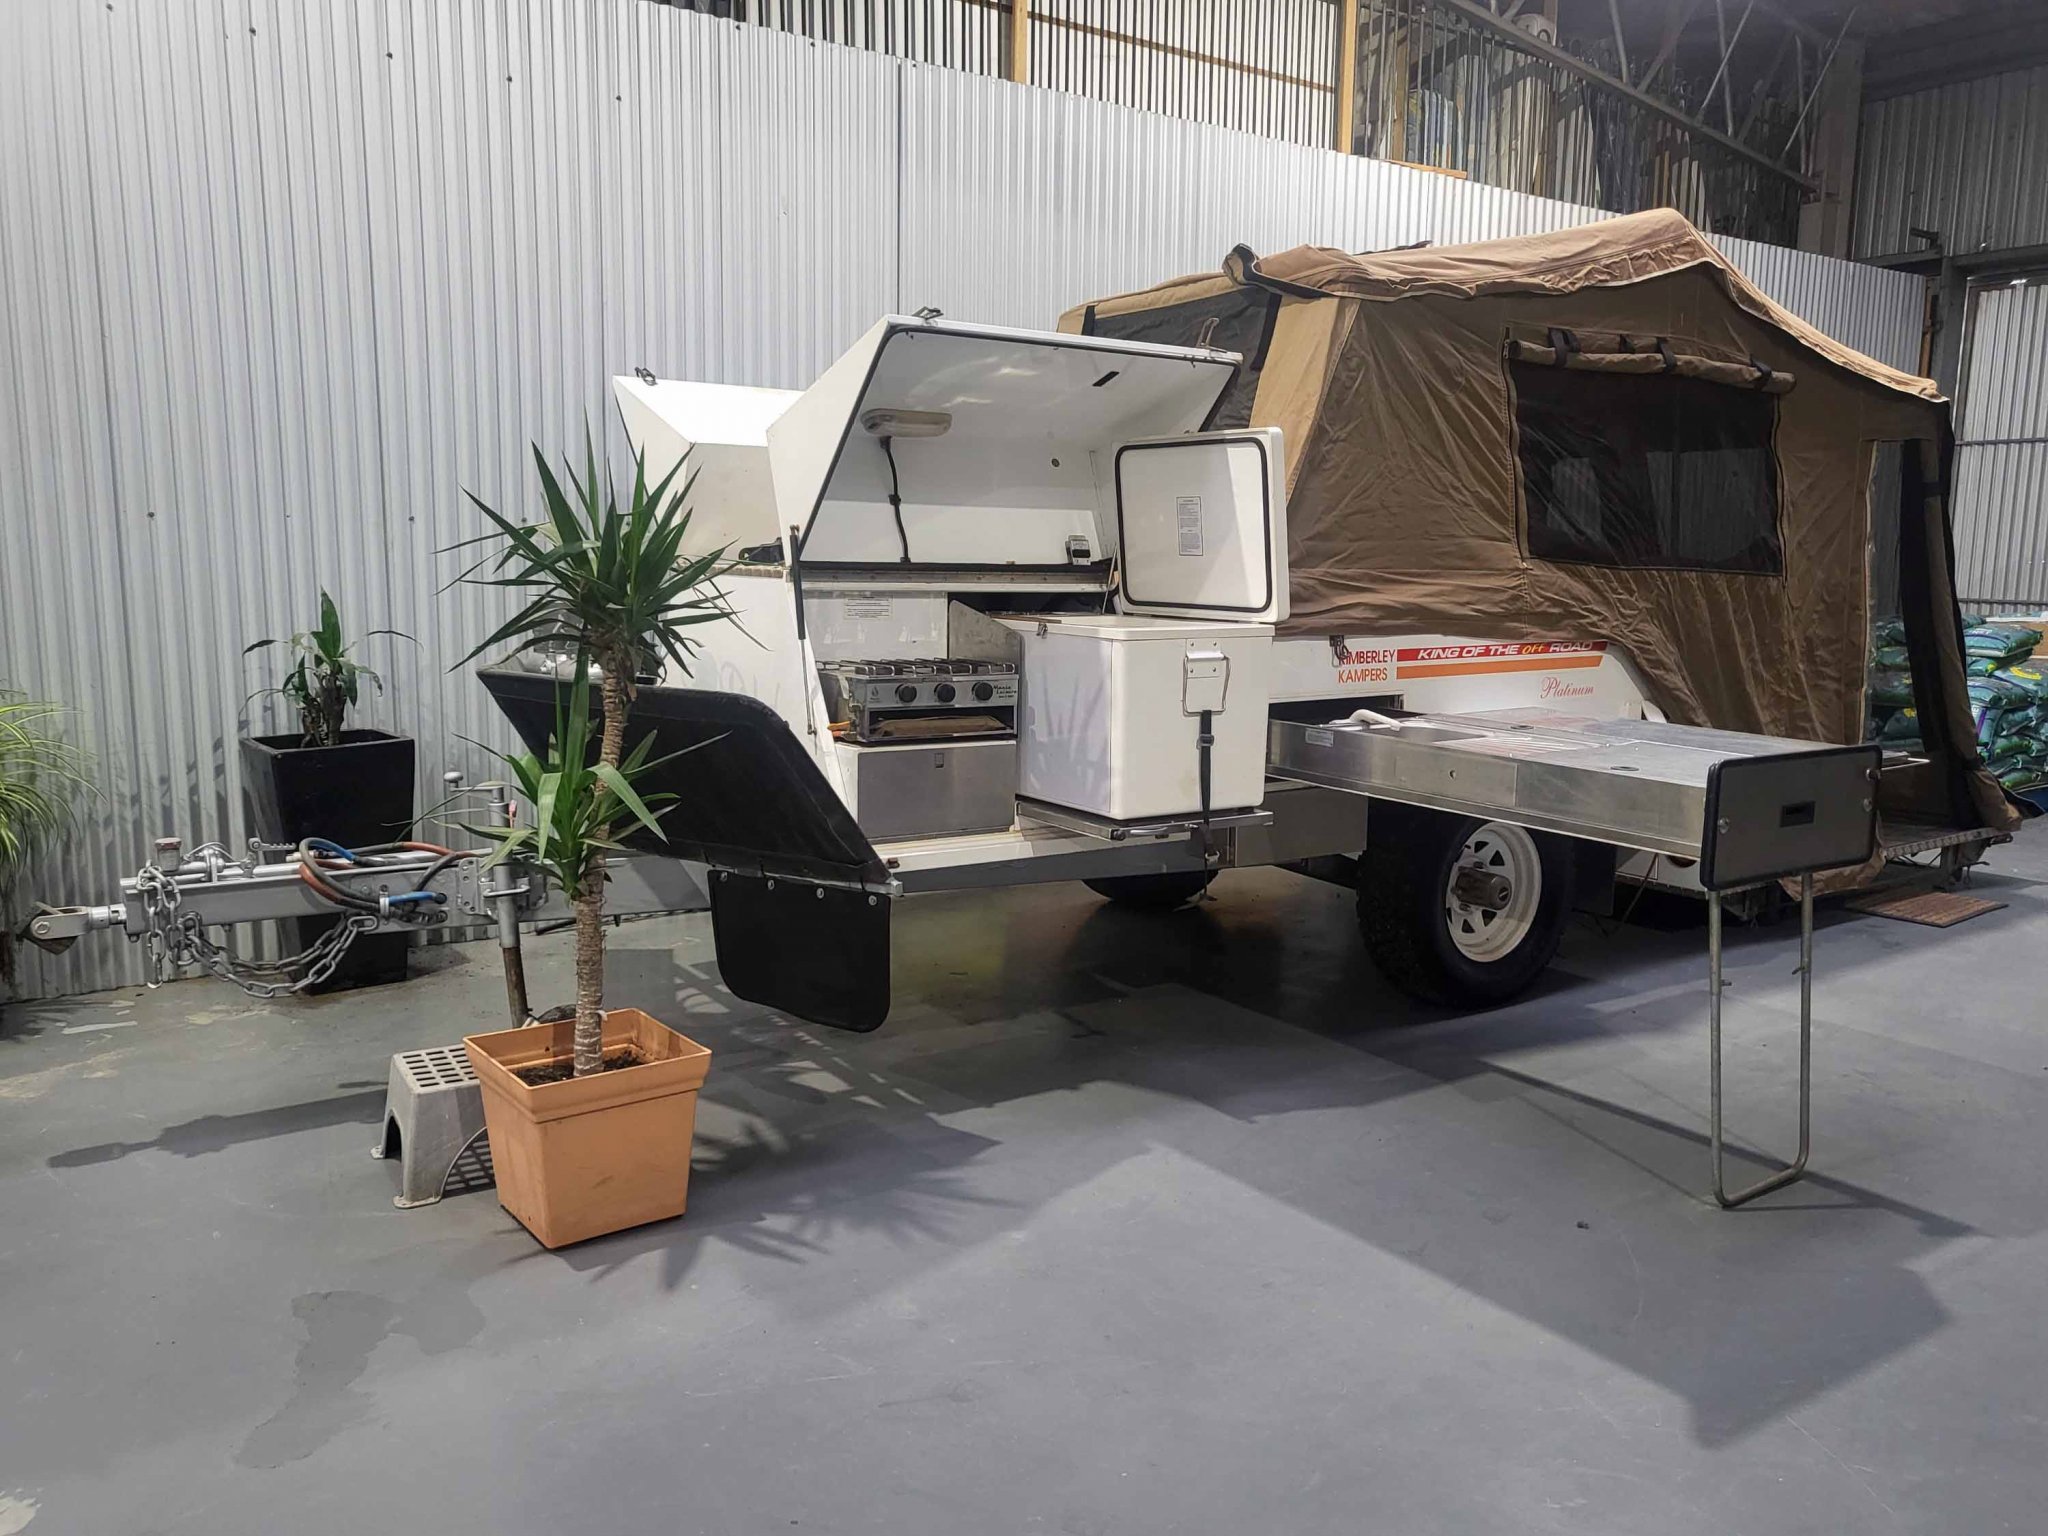 Kimberly “King of the road” Camper 